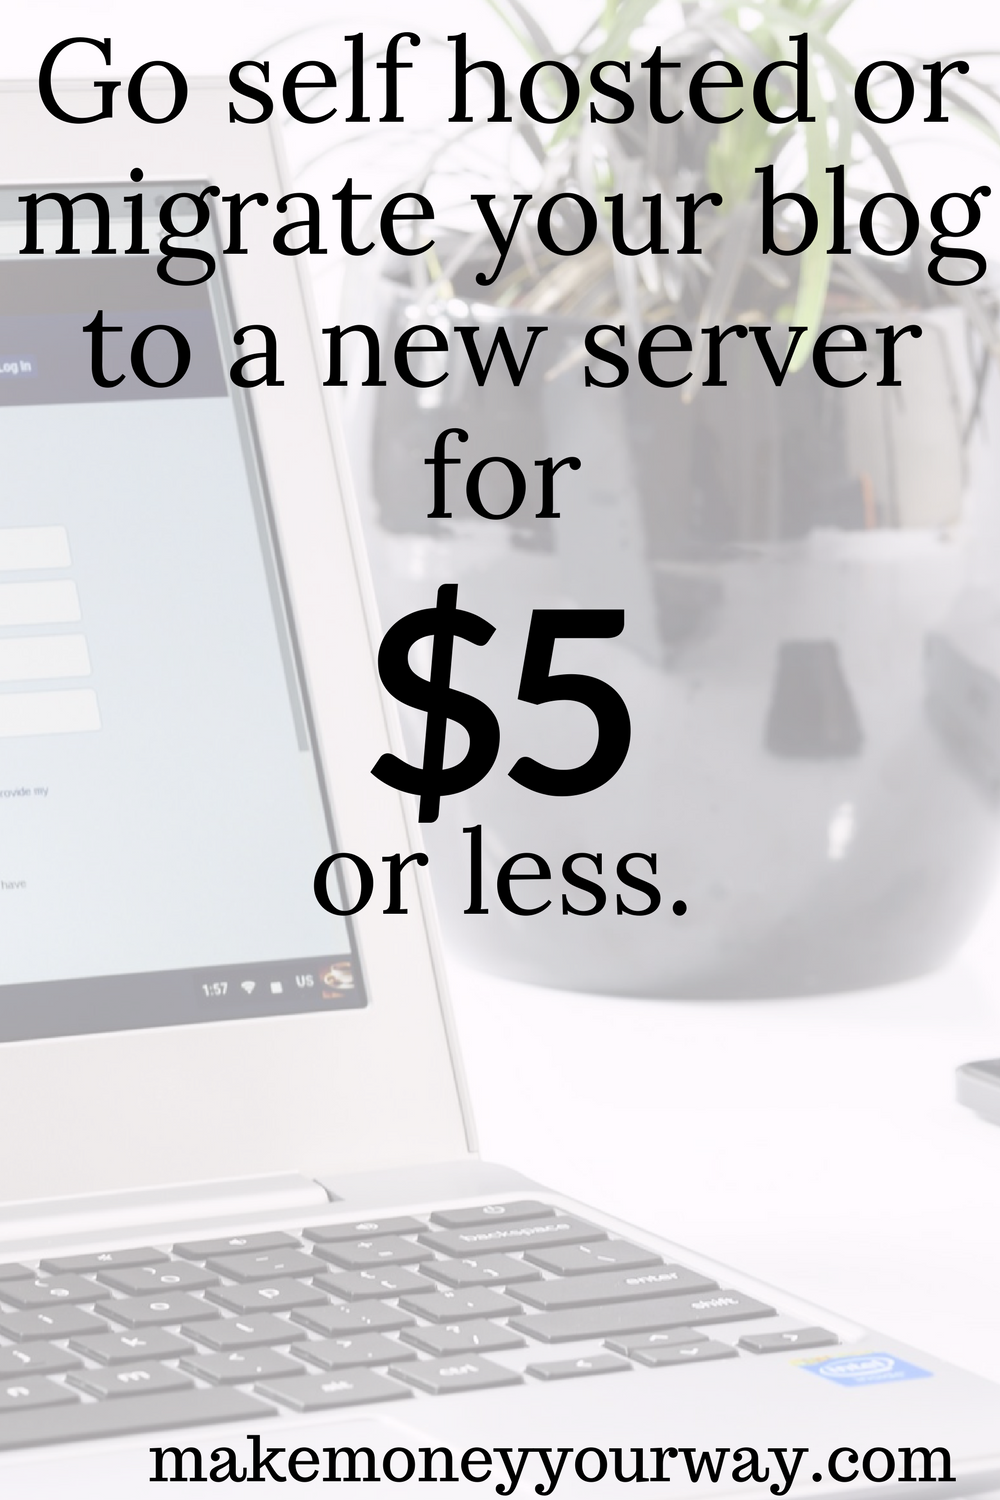 Go self hosted or migrate your blog to a new server for $5 or less.